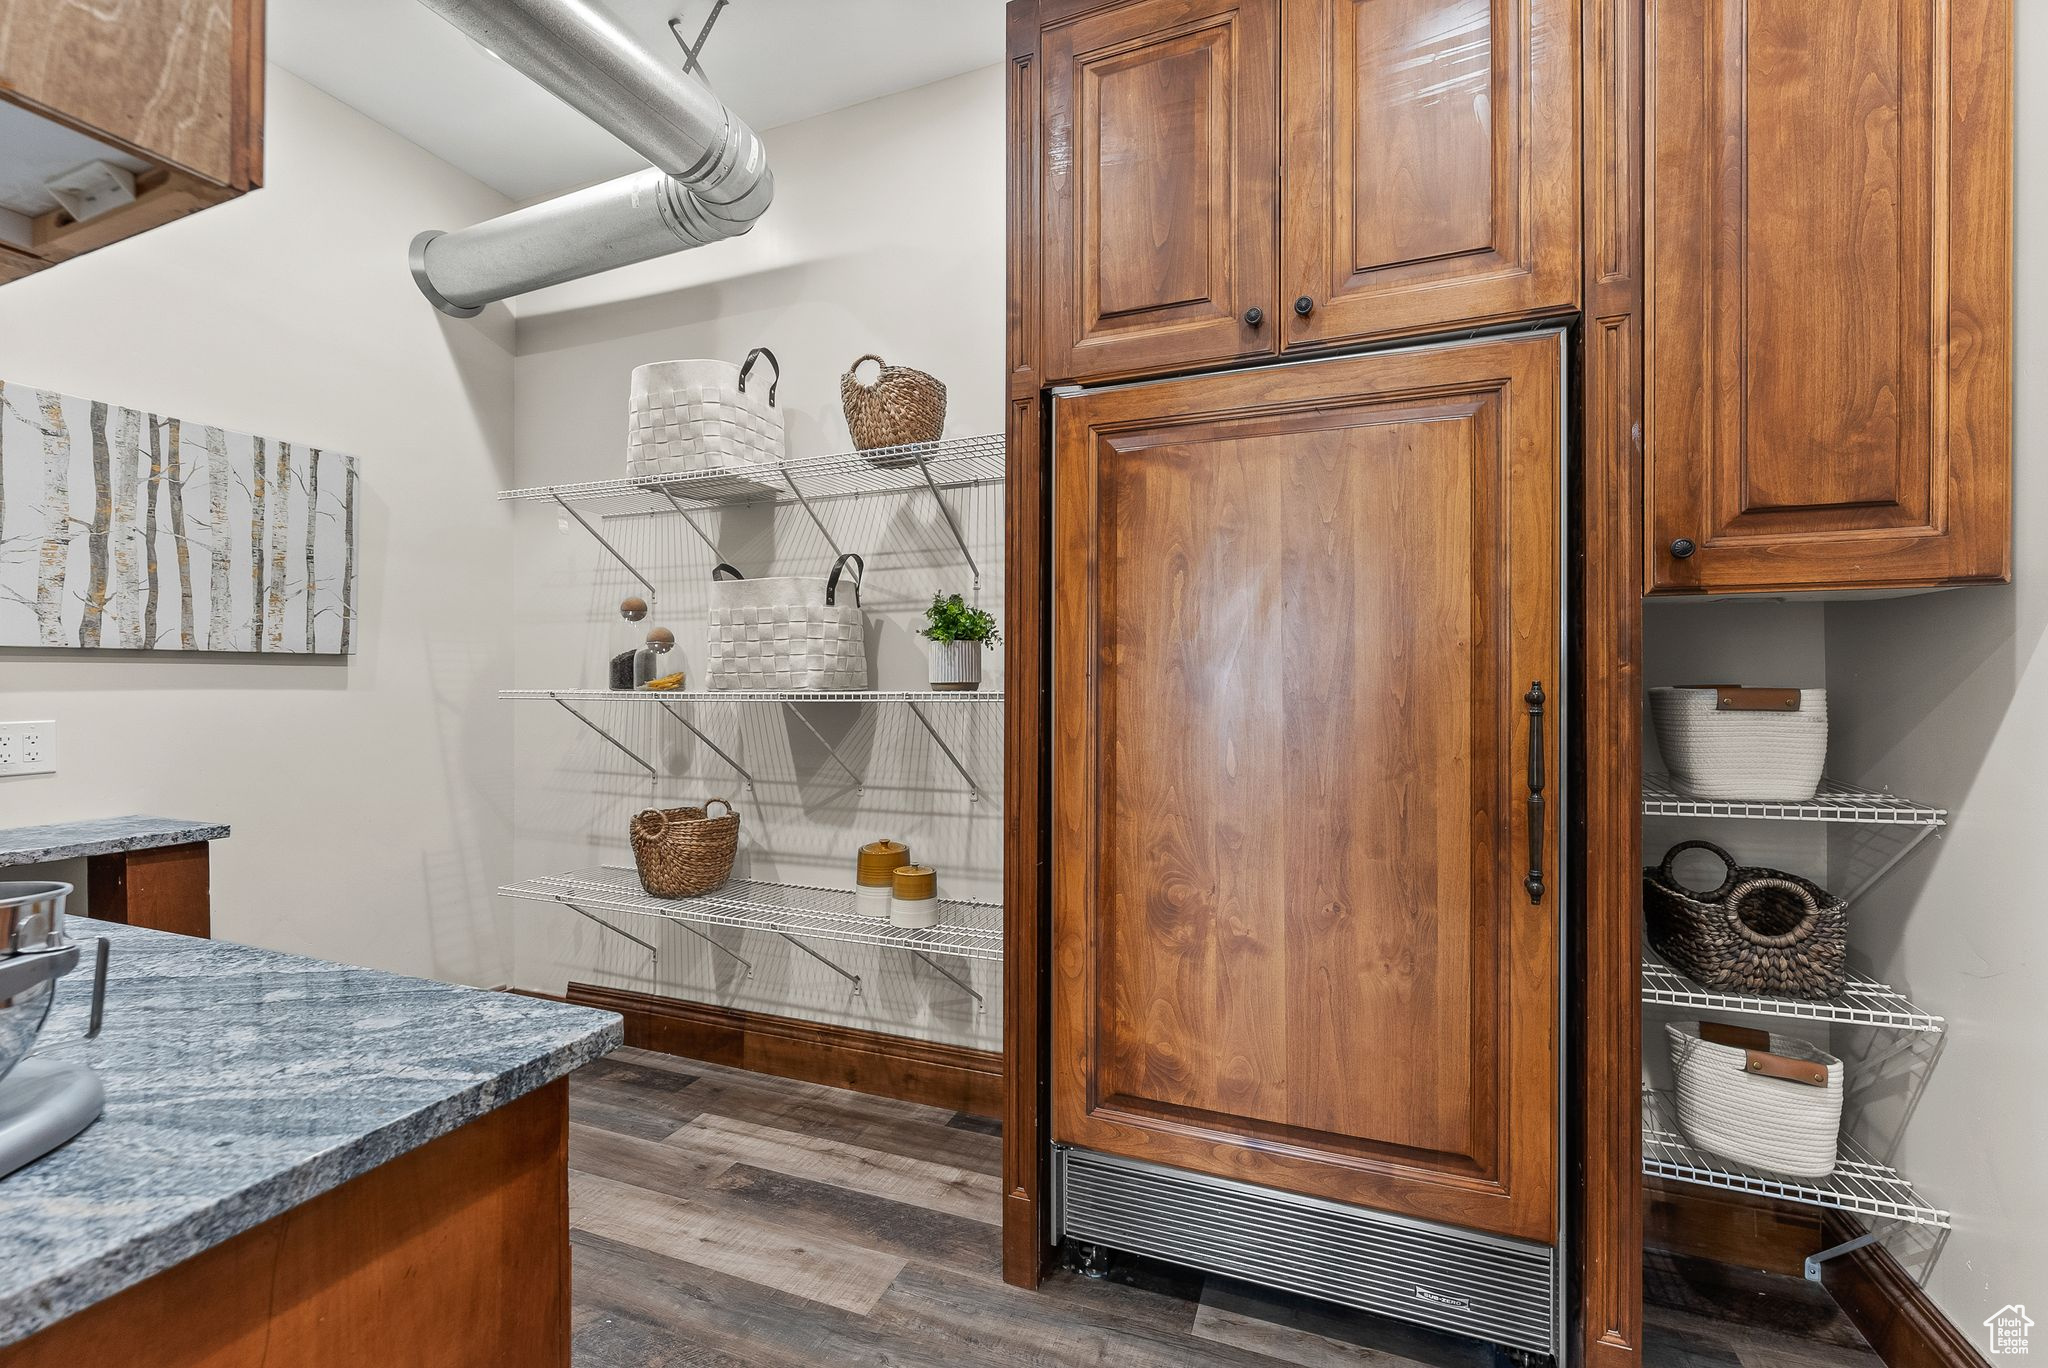 Butler Pantry - Located off of kitchen this is the perfect storage and prep space, with a custom freezer it is the perfect design.